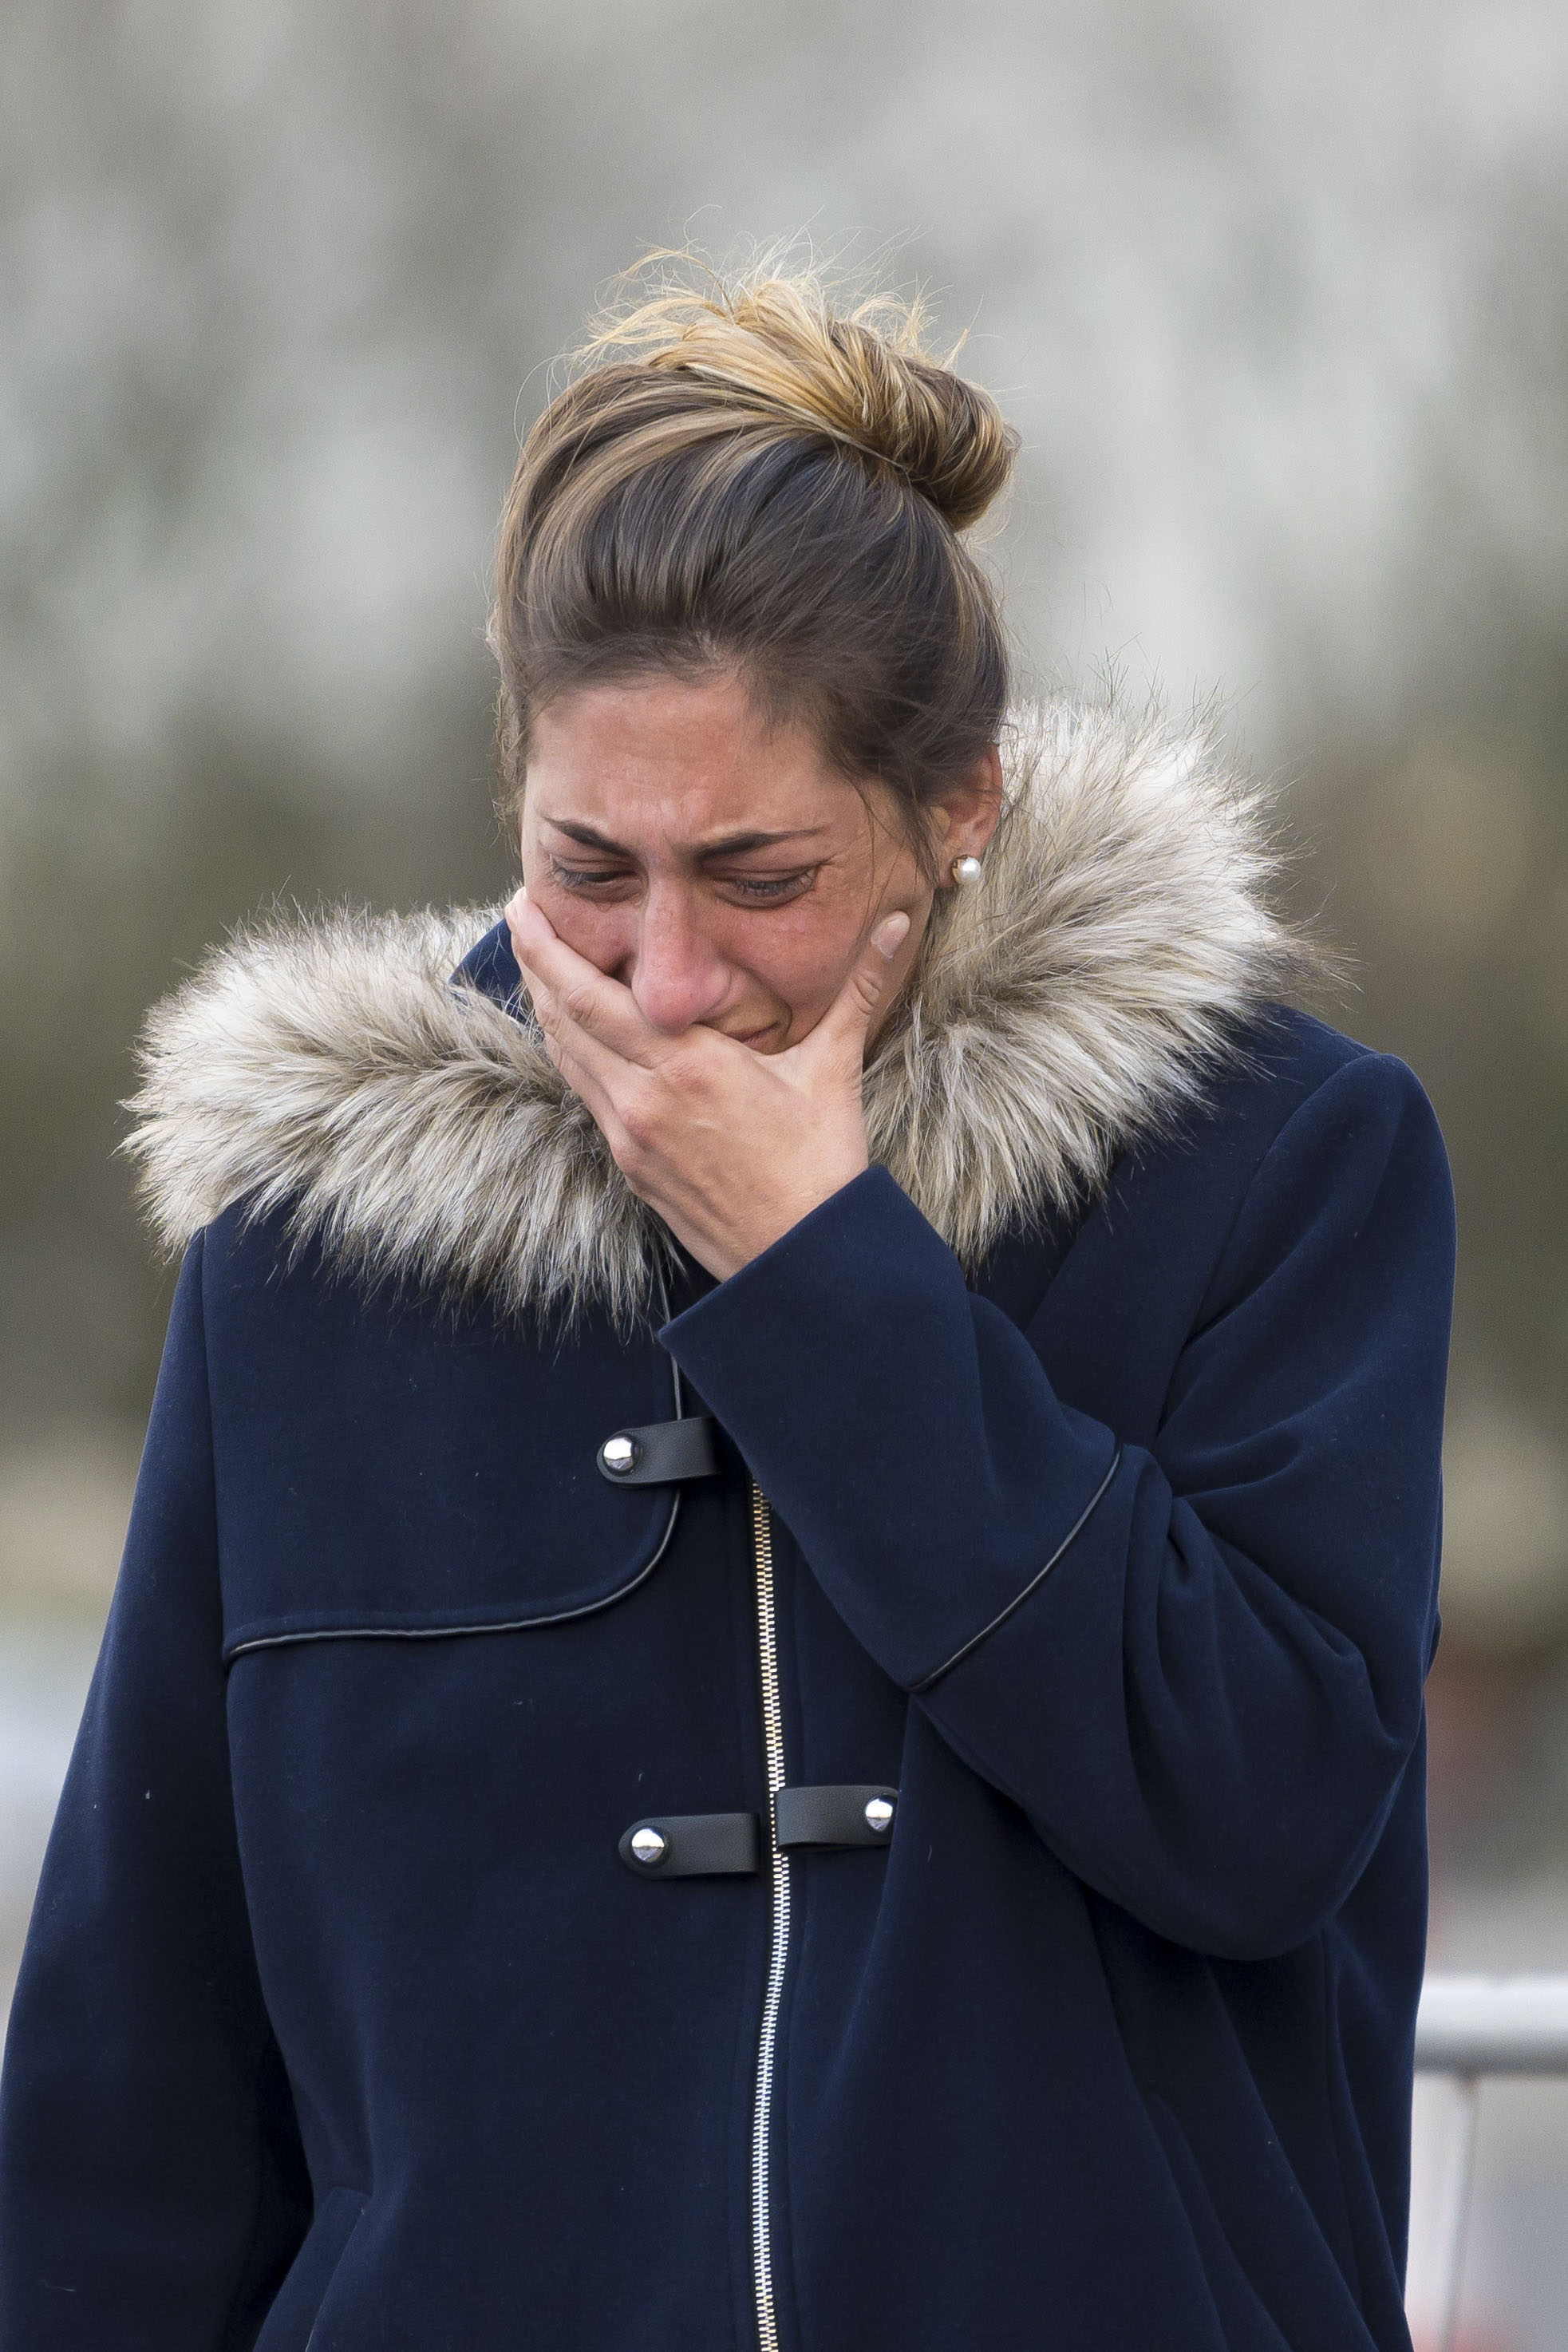  CARDIFF, WALES - JANUARY 25: Romina Sala, sister of new Cardiff City F.C signing Emiliano Sala, visits tributes at the Cardiff City Stadium on January 25, 2019 in Cardiff, Wales. Emiliano Sala is one of two people who boarded a Piper Malibu private 